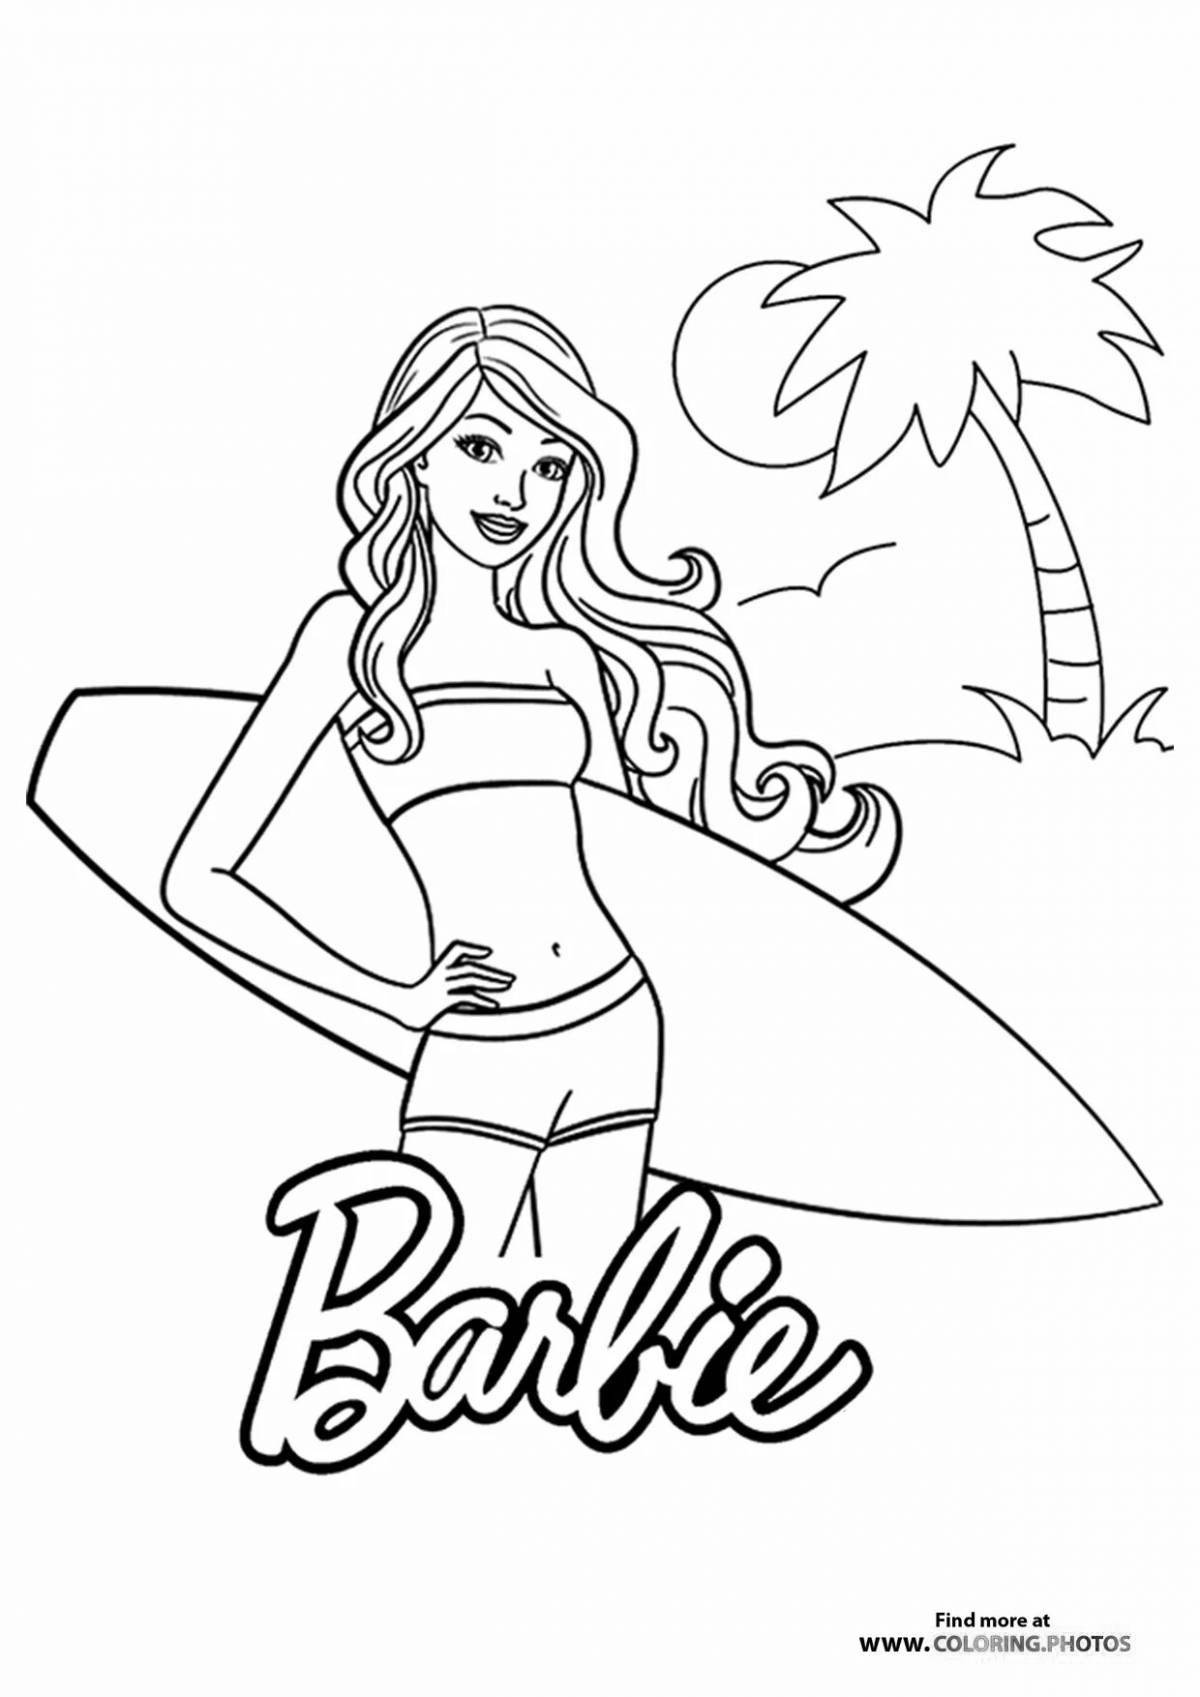 Exquisite barbie coloring book for kids 6-7 years old